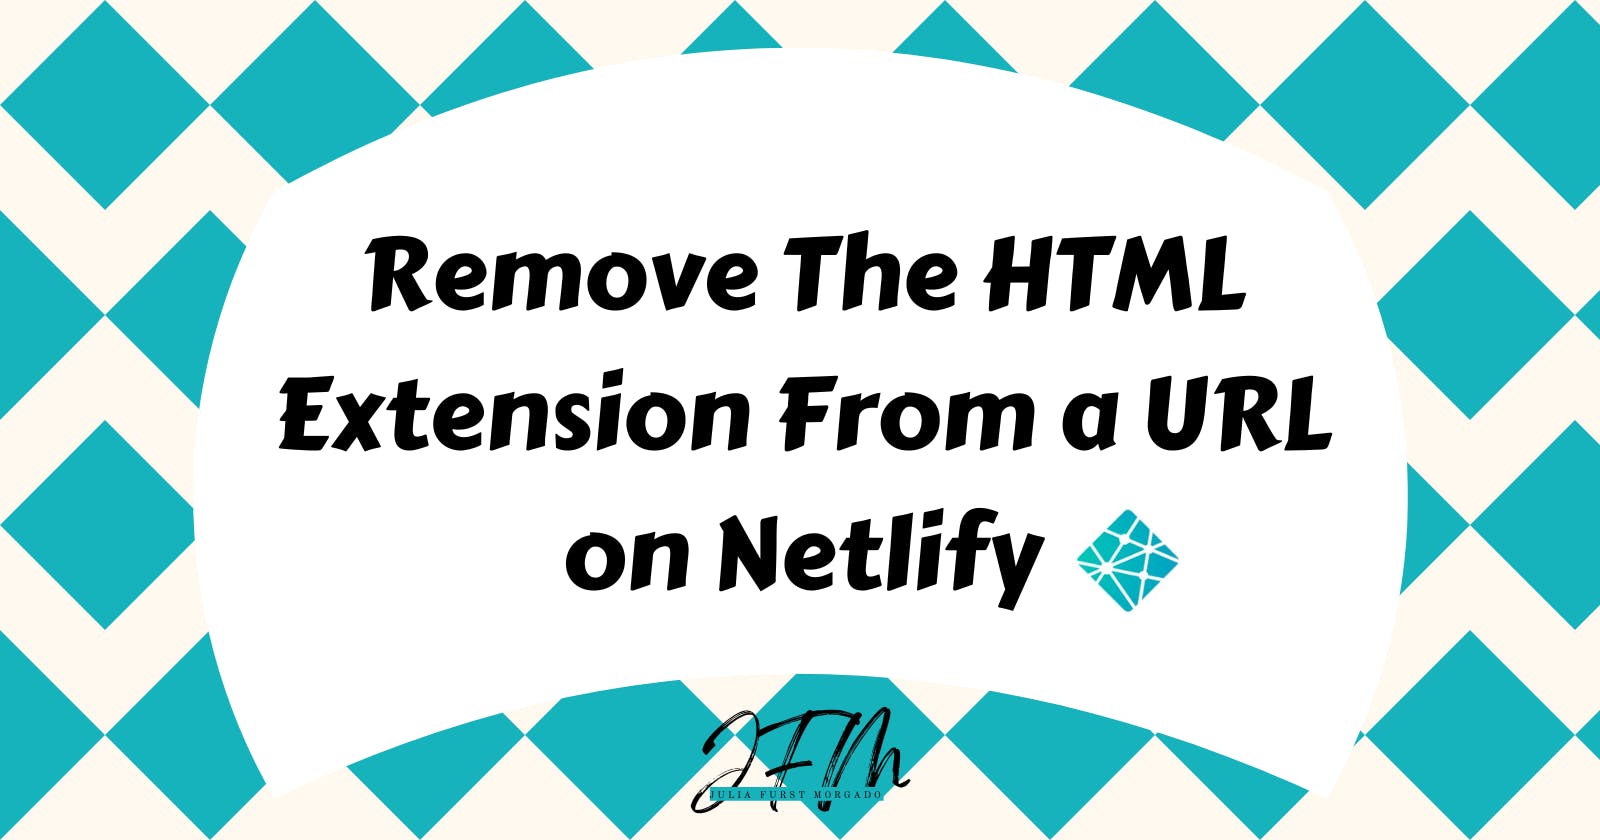 How To Remove The HTML Extension From a URL on Netlify